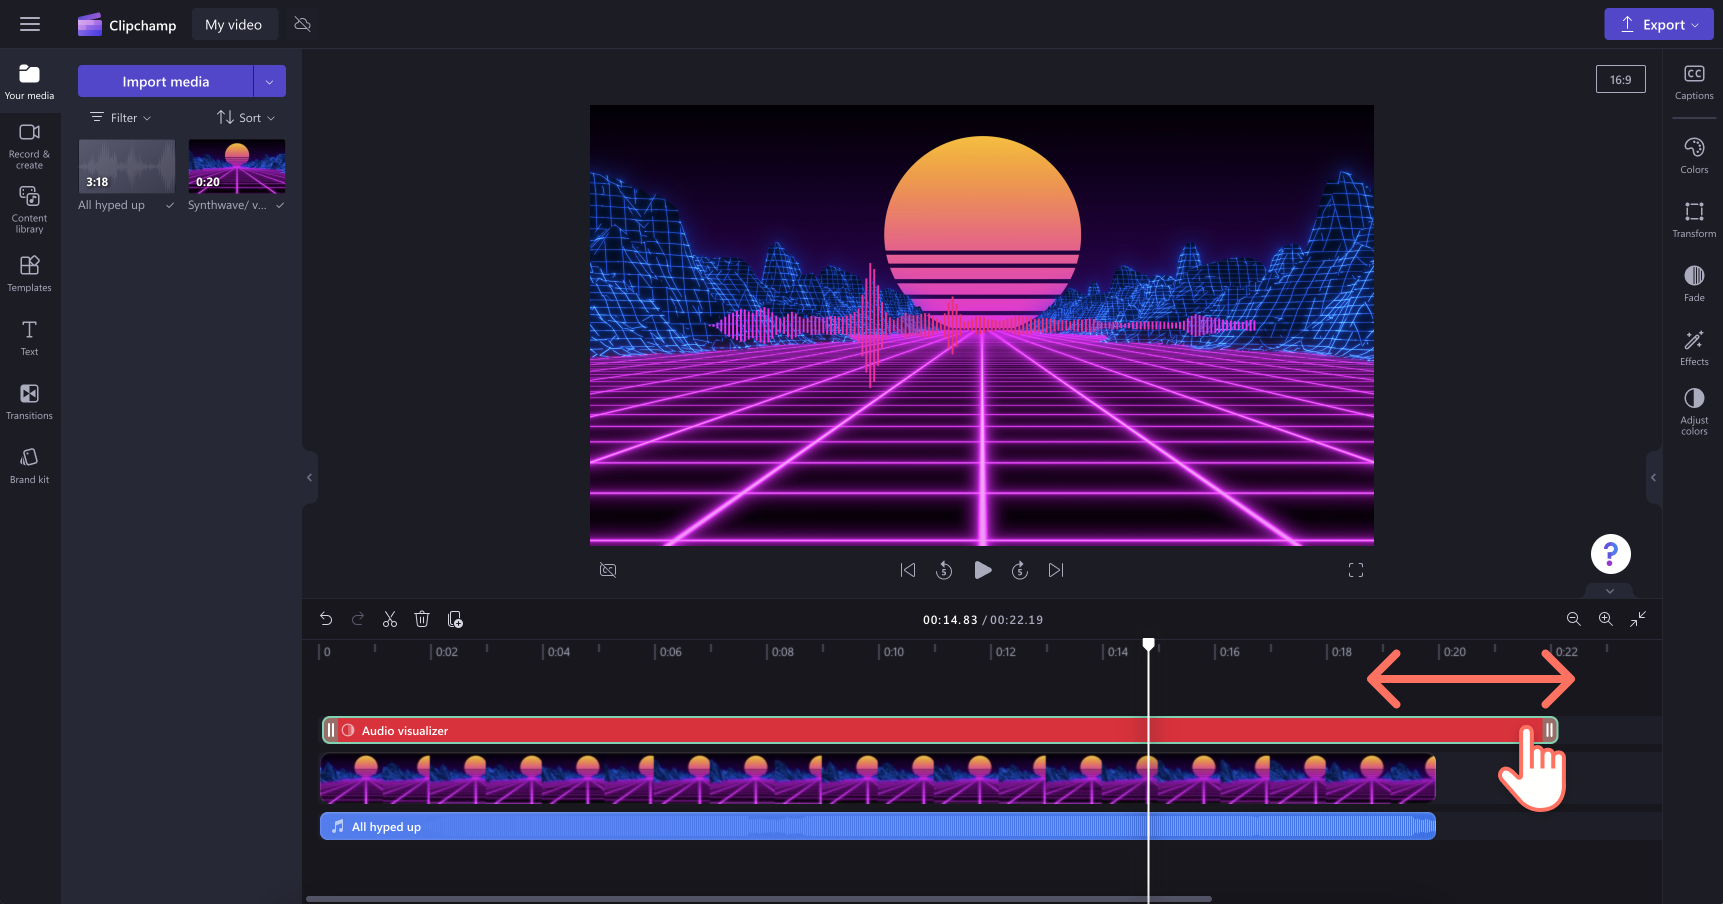 Trimming audio visualizer to match audio length